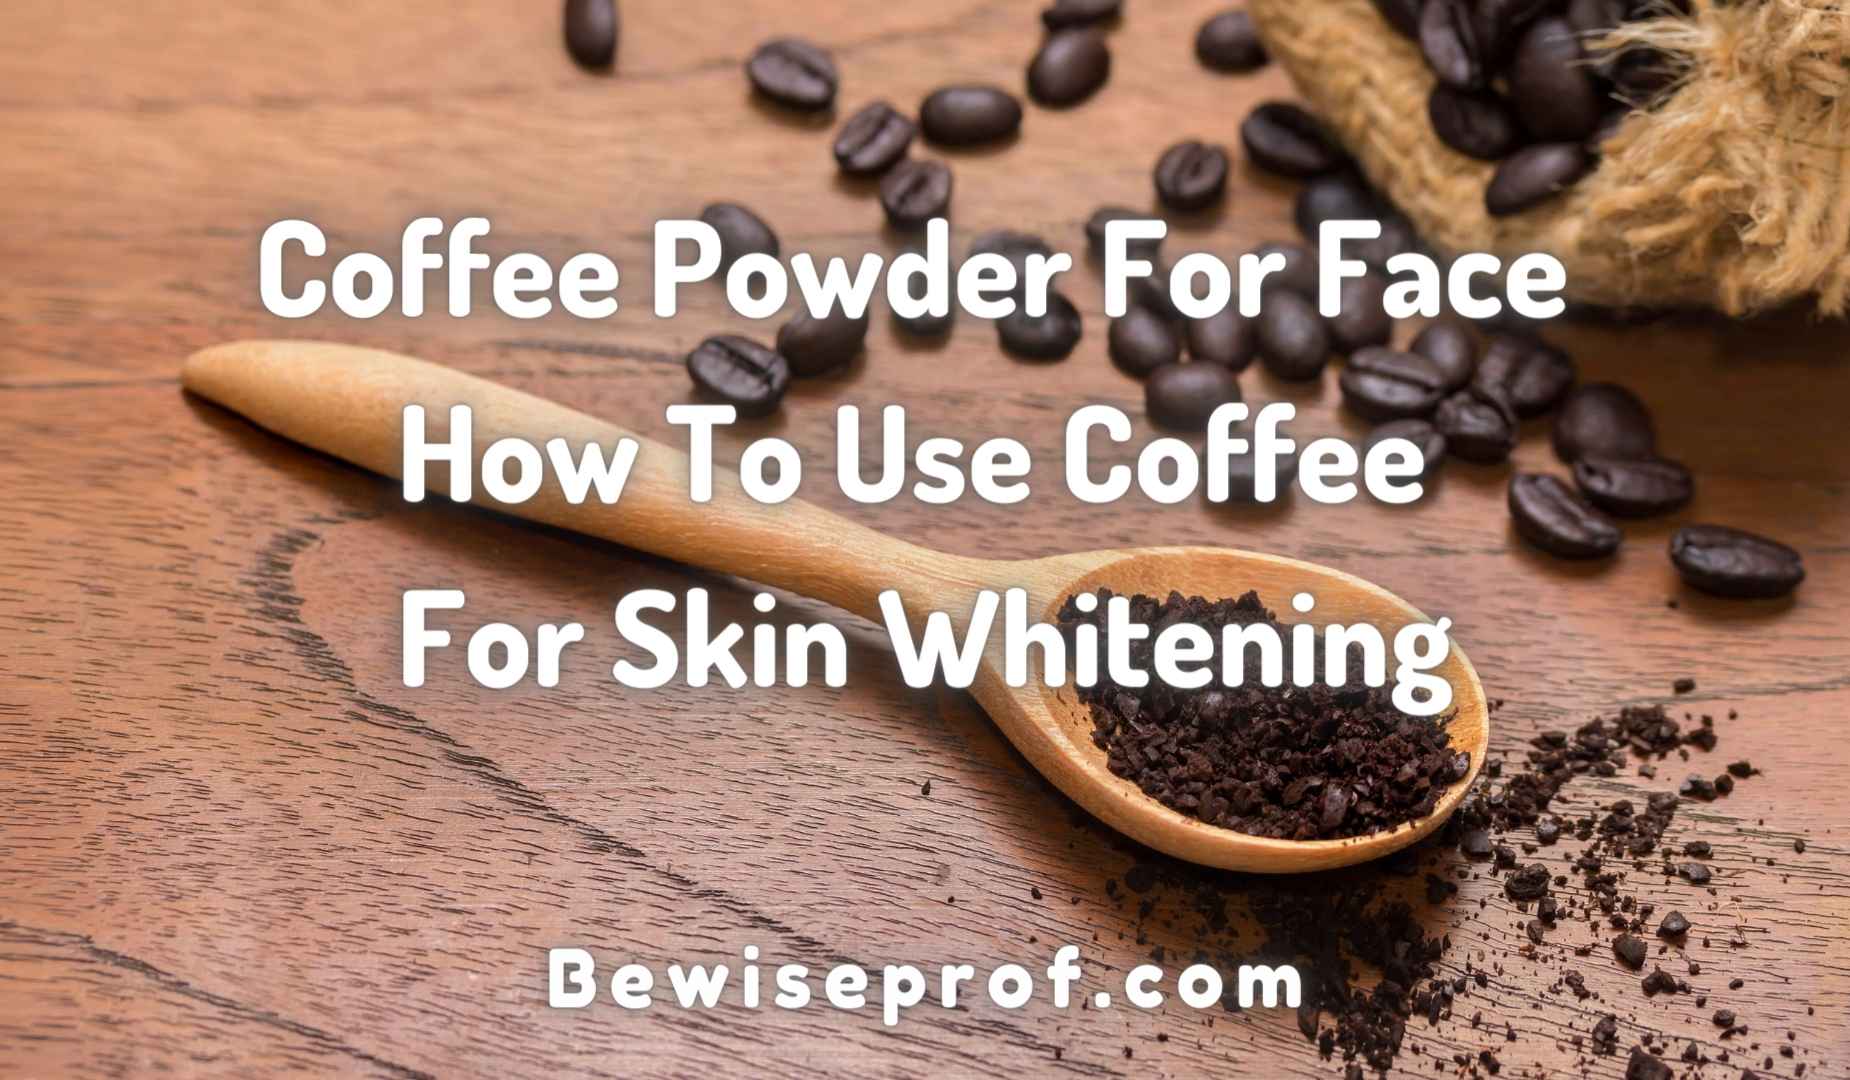 Coffee Powder For Face - How To Use Coffee For Skin Whitening